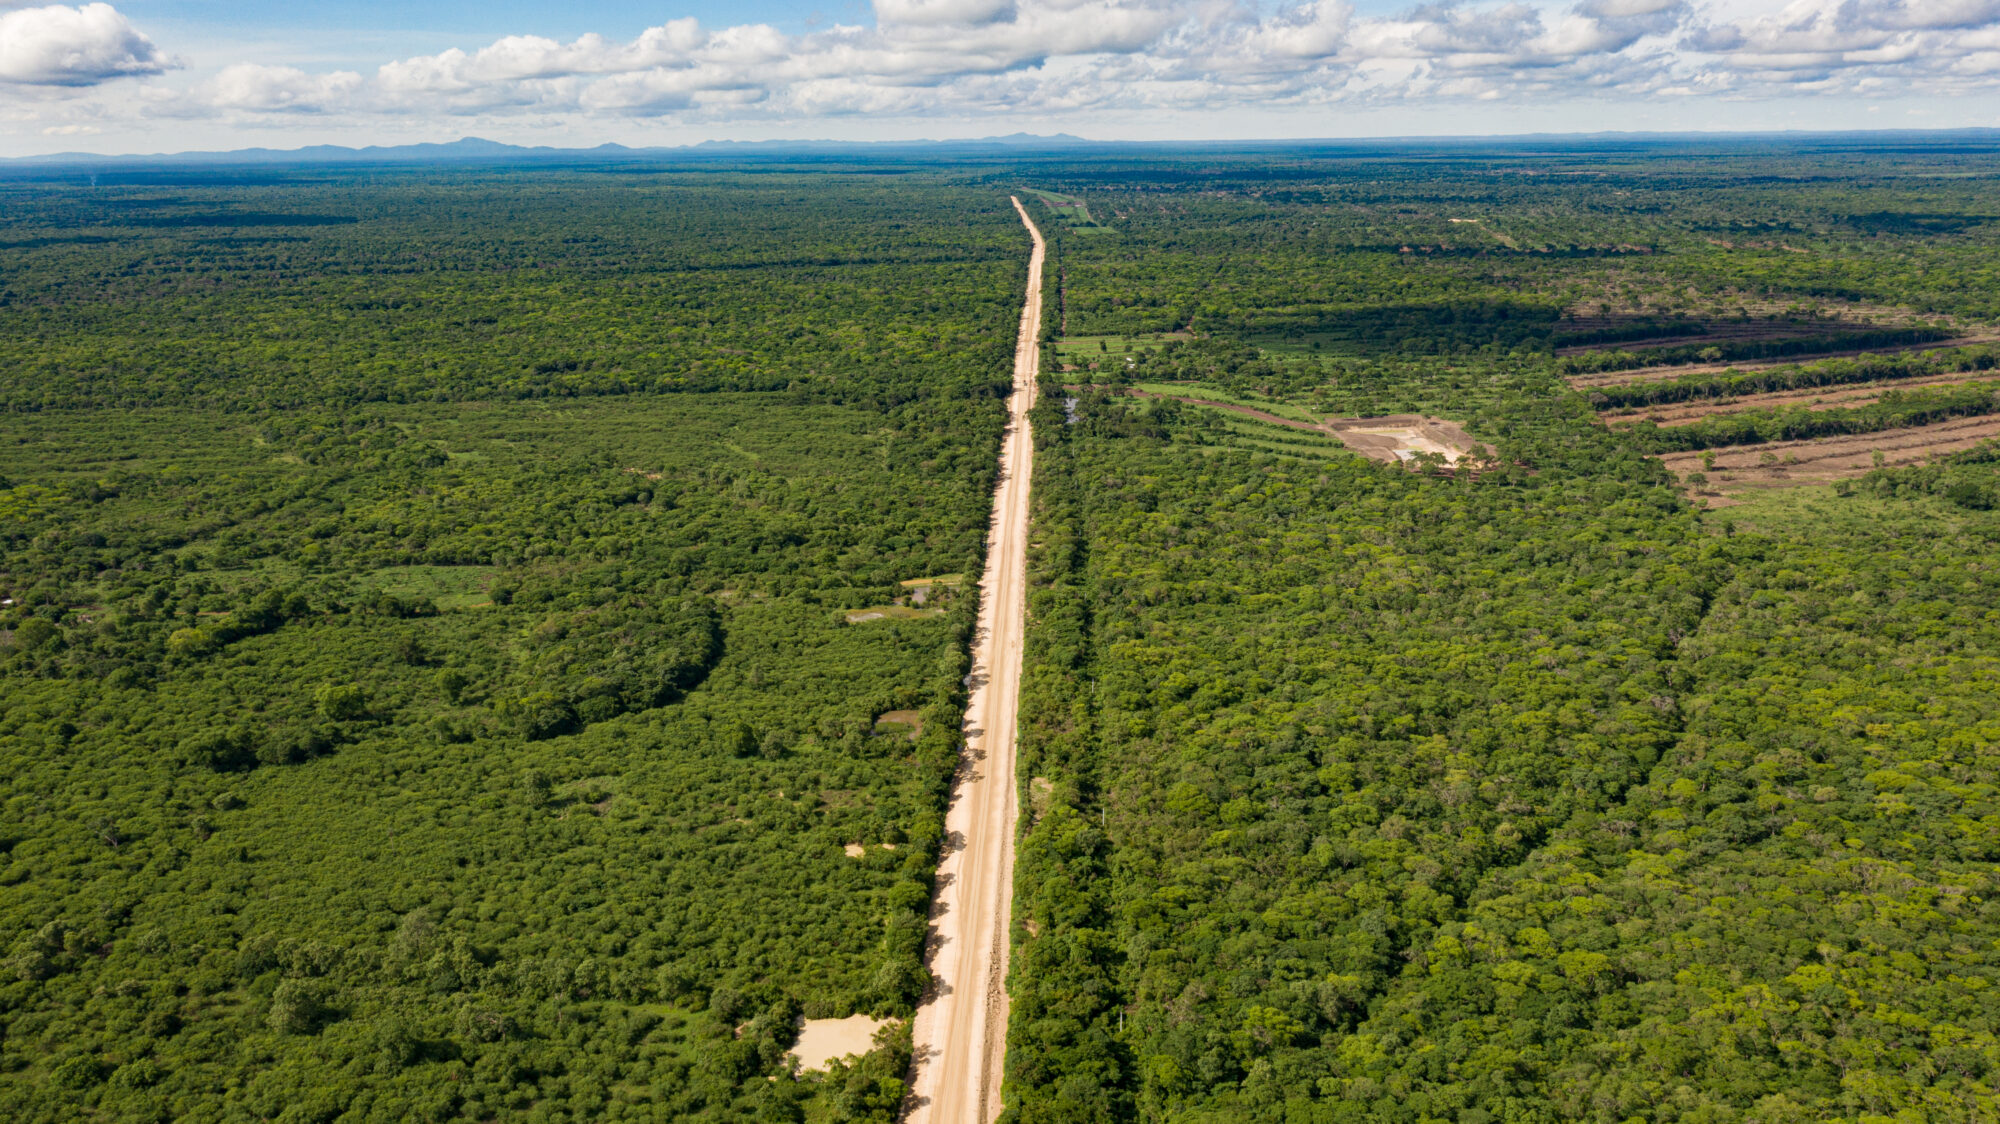 Aerial view of a road in the middle of the Chiquitano dry forest in Bolivia.